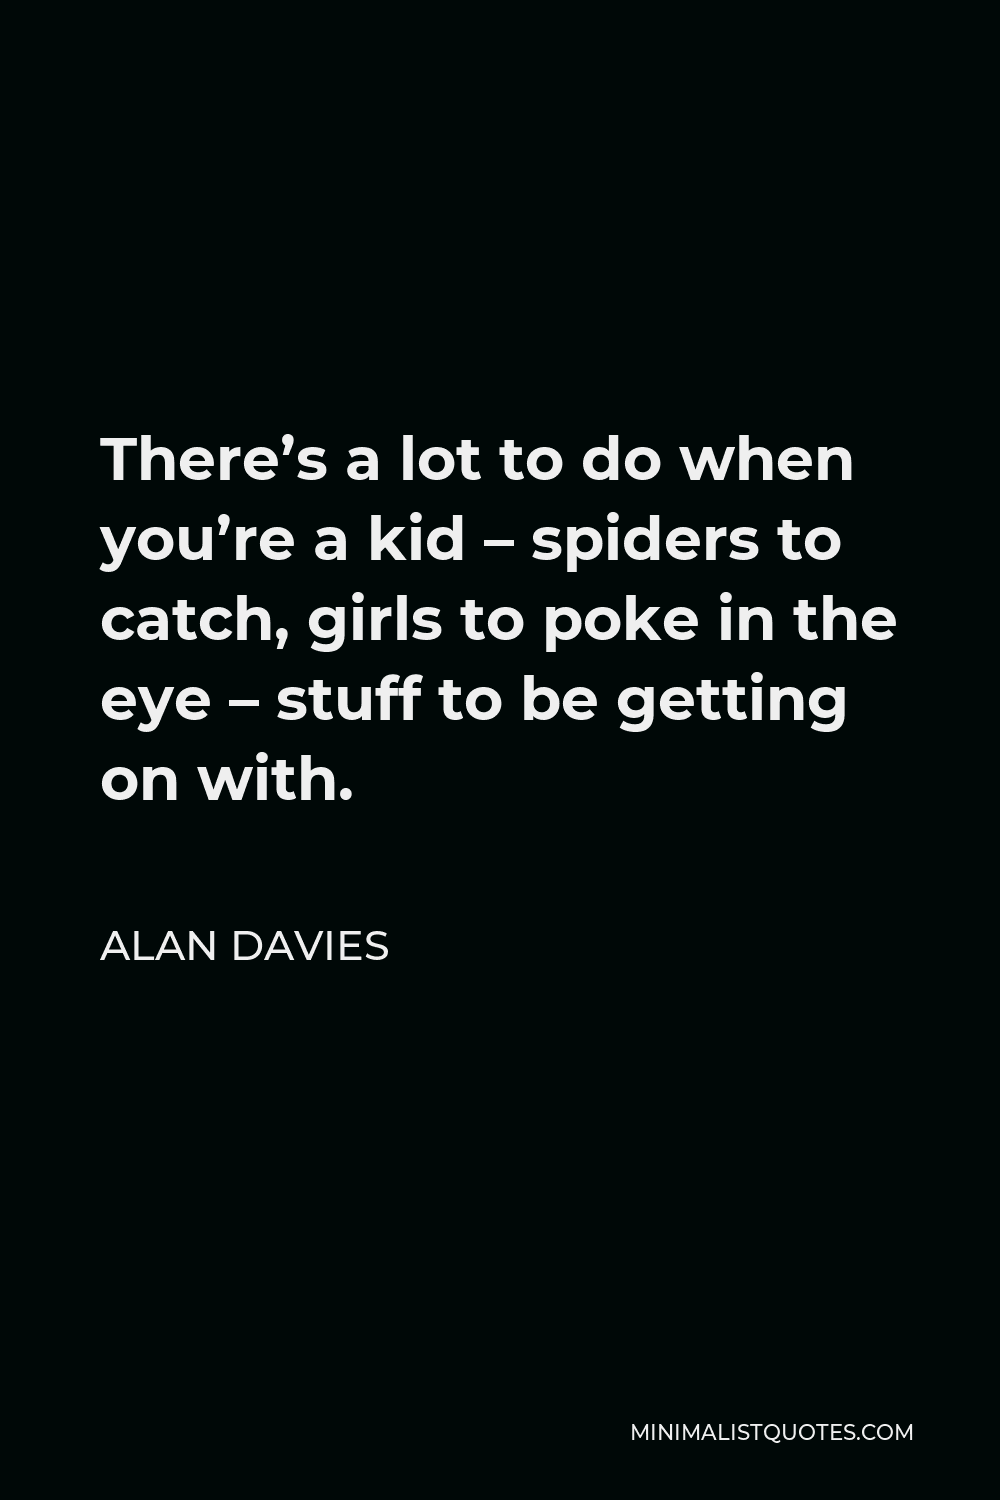 Alan Davies Quote - There’s a lot to do when you’re a kid – spiders to catch, girls to poke in the eye – stuff to be getting on with.